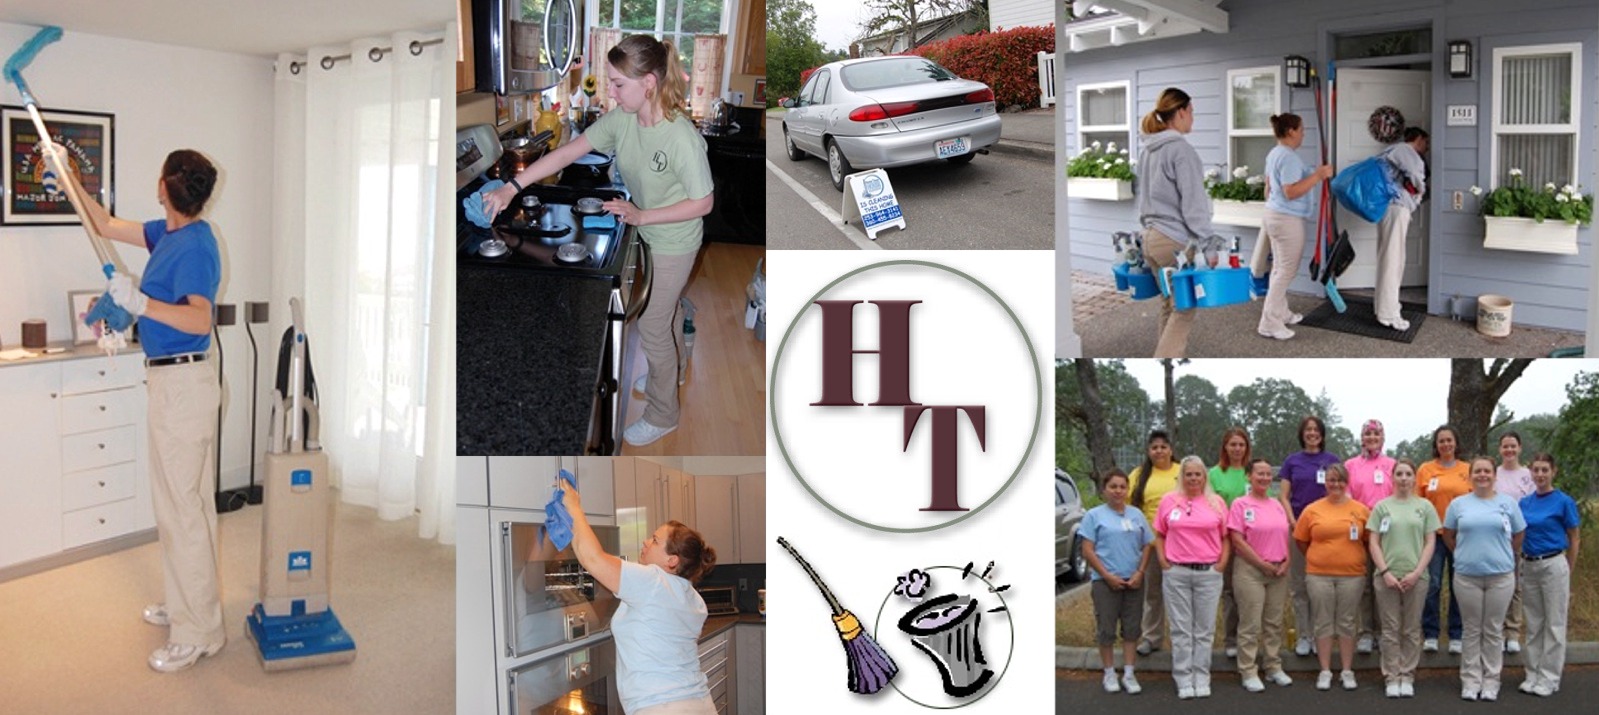 Home Town Housekeeping, providing house cleaning services and maid services for Lakewood, Lacey, Dupont and Olympia, WA